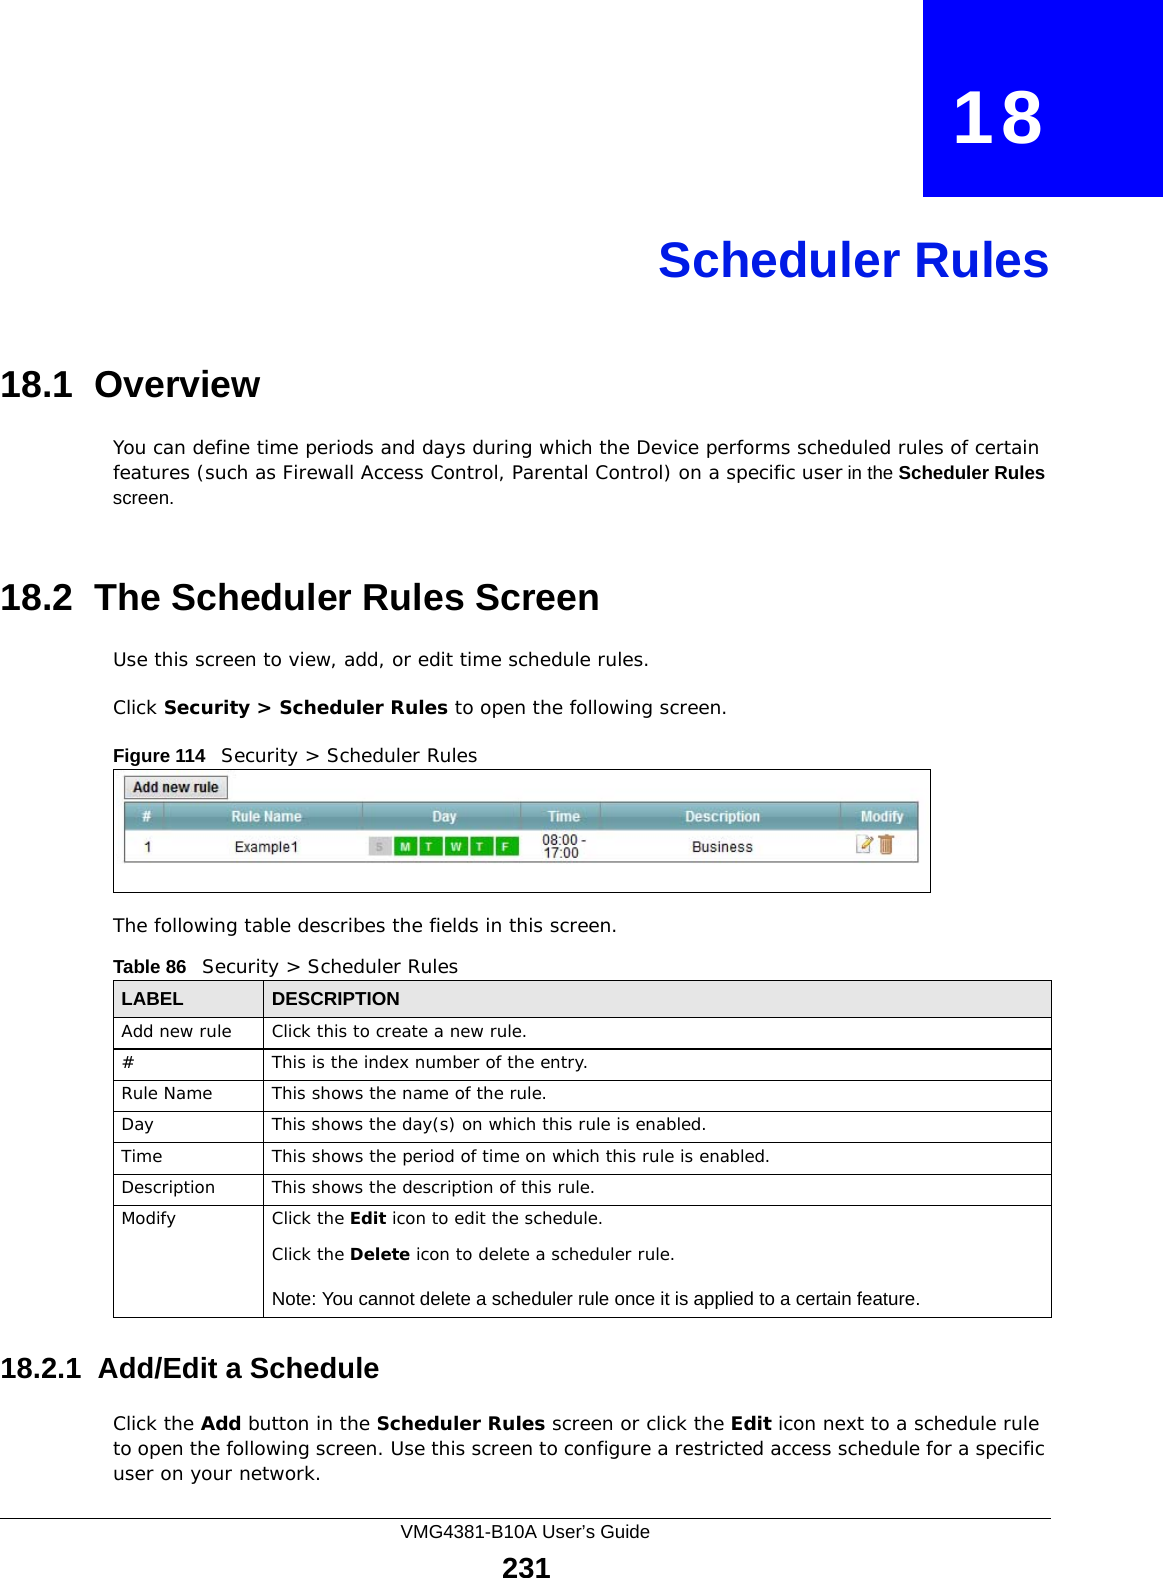 VMG4381-B10A User’s Guide231CHAPTER   18Scheduler Rules18.1  OverviewYou can define time periods and days during which the Device performs scheduled rules of certain features (such as Firewall Access Control, Parental Control) on a specific user in the Scheduler Rules screen. 18.2  The Scheduler Rules ScreenUse this screen to view, add, or edit time schedule rules.Click Security &gt; Scheduler Rules to open the following screen. Figure 114   Security &gt; Scheduler Rules The following table describes the fields in this screen. 18.2.1  Add/Edit a ScheduleClick the Add button in the Scheduler Rules screen or click the Edit icon next to a schedule rule to open the following screen. Use this screen to configure a restricted access schedule for a specific user on your network. Table 86   Security &gt; Scheduler RulesLABEL DESCRIPTIONAdd new rule Click this to create a new rule.#This is the index number of the entry.Rule Name This shows the name of the rule.Day This shows the day(s) on which this rule is enabled.Time This shows the period of time on which this rule is enabled.Description This shows the description of this rule.Modify Click the Edit icon to edit the schedule.Click the Delete icon to delete a scheduler rule.Note: You cannot delete a scheduler rule once it is applied to a certain feature.